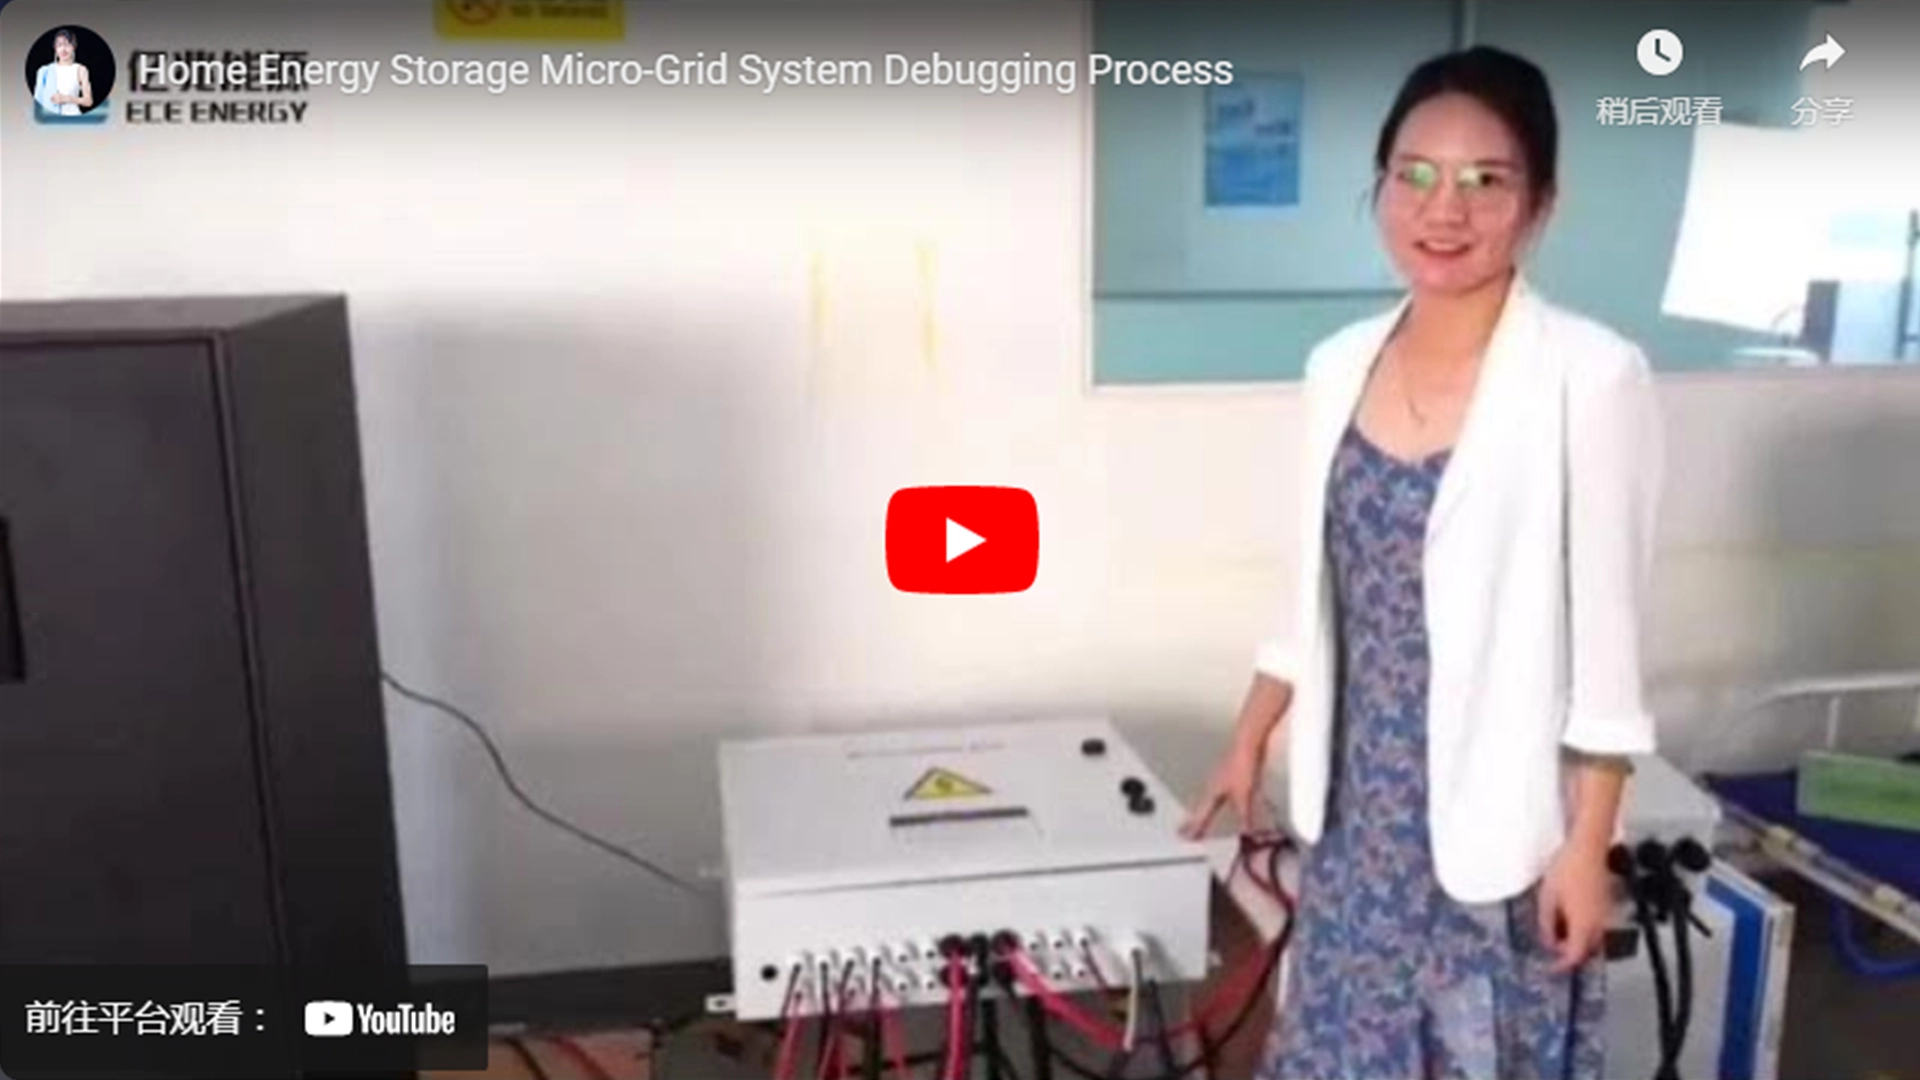 Home Energy Storage Micro-Grid System Debugging Process